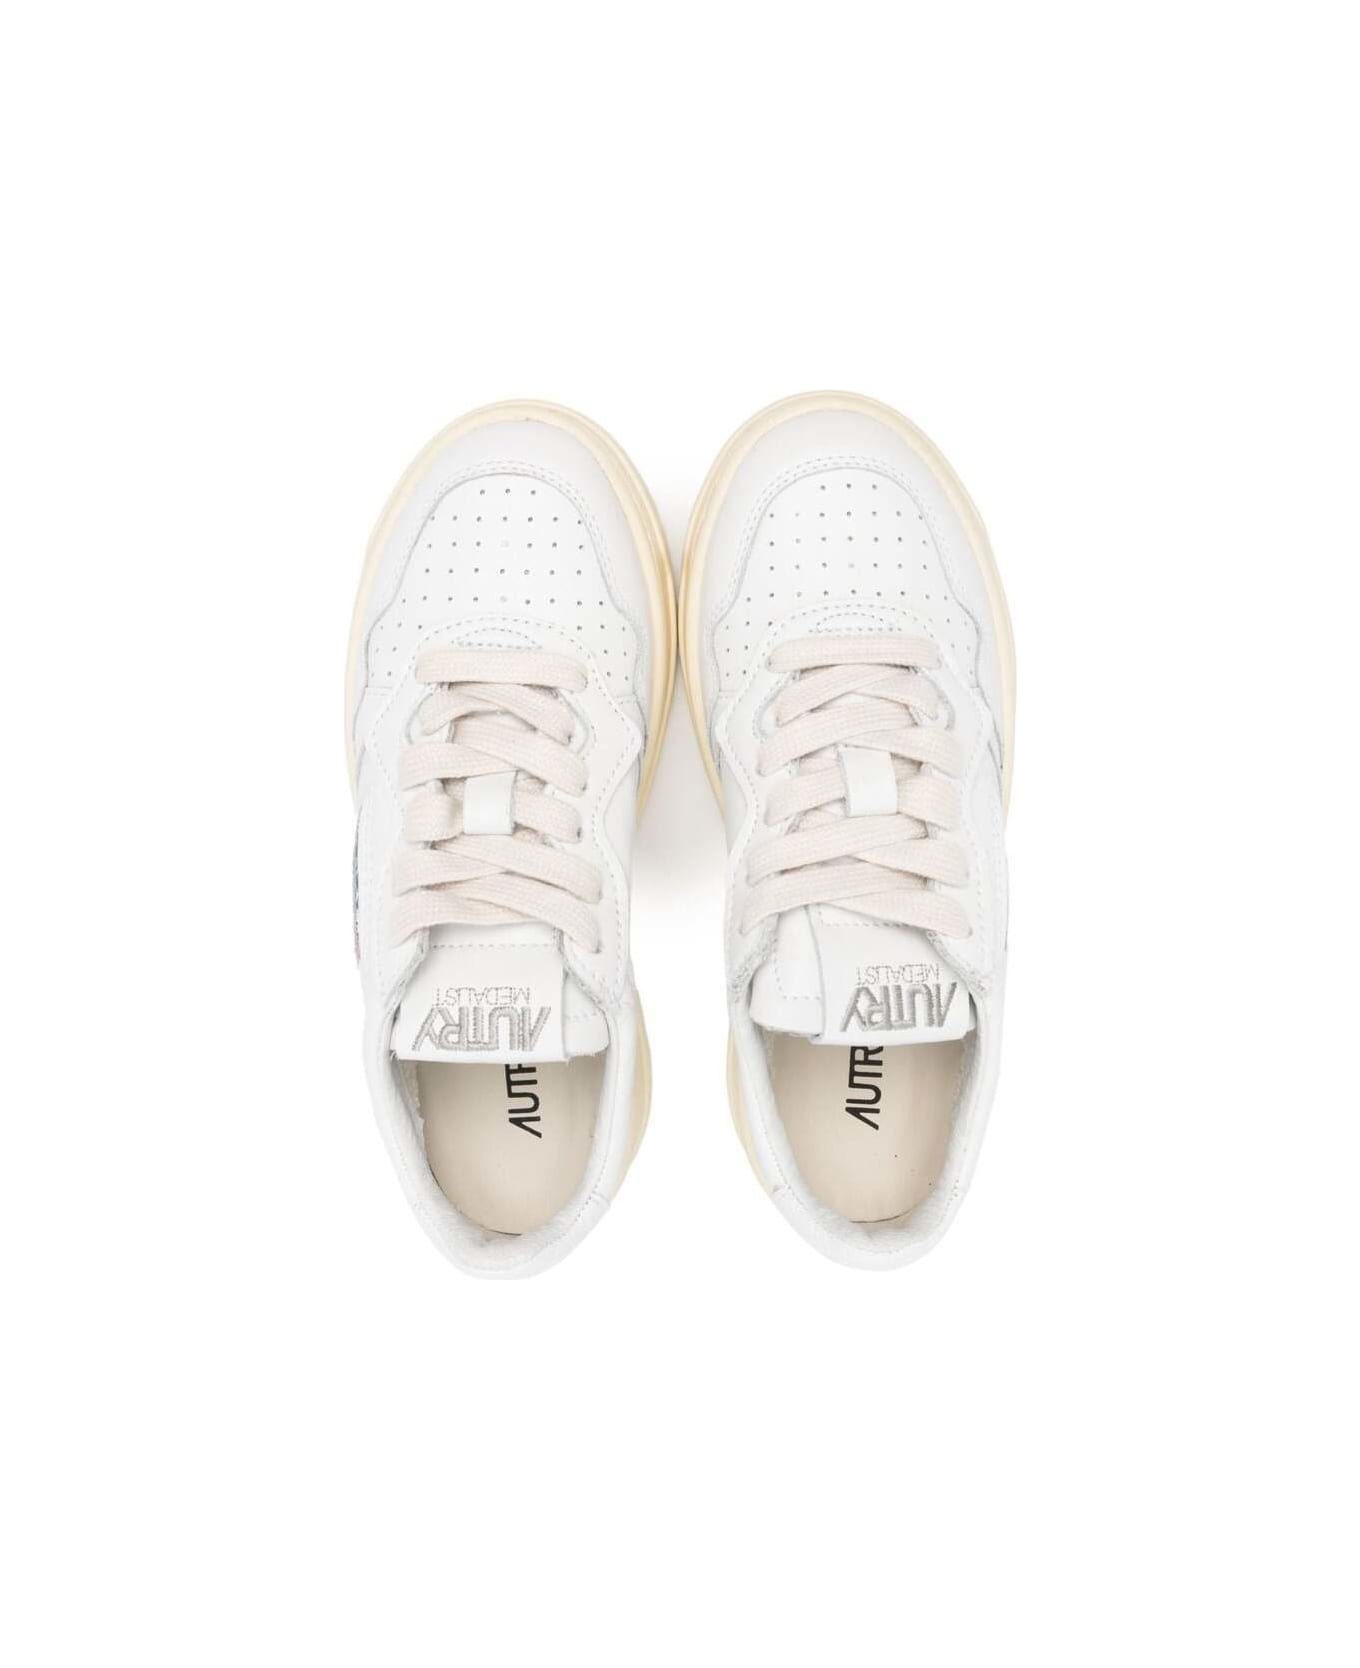 Autry White 'medalist' Low Top Sneakers In Cow Leather Boy - Wht/wht シューズ